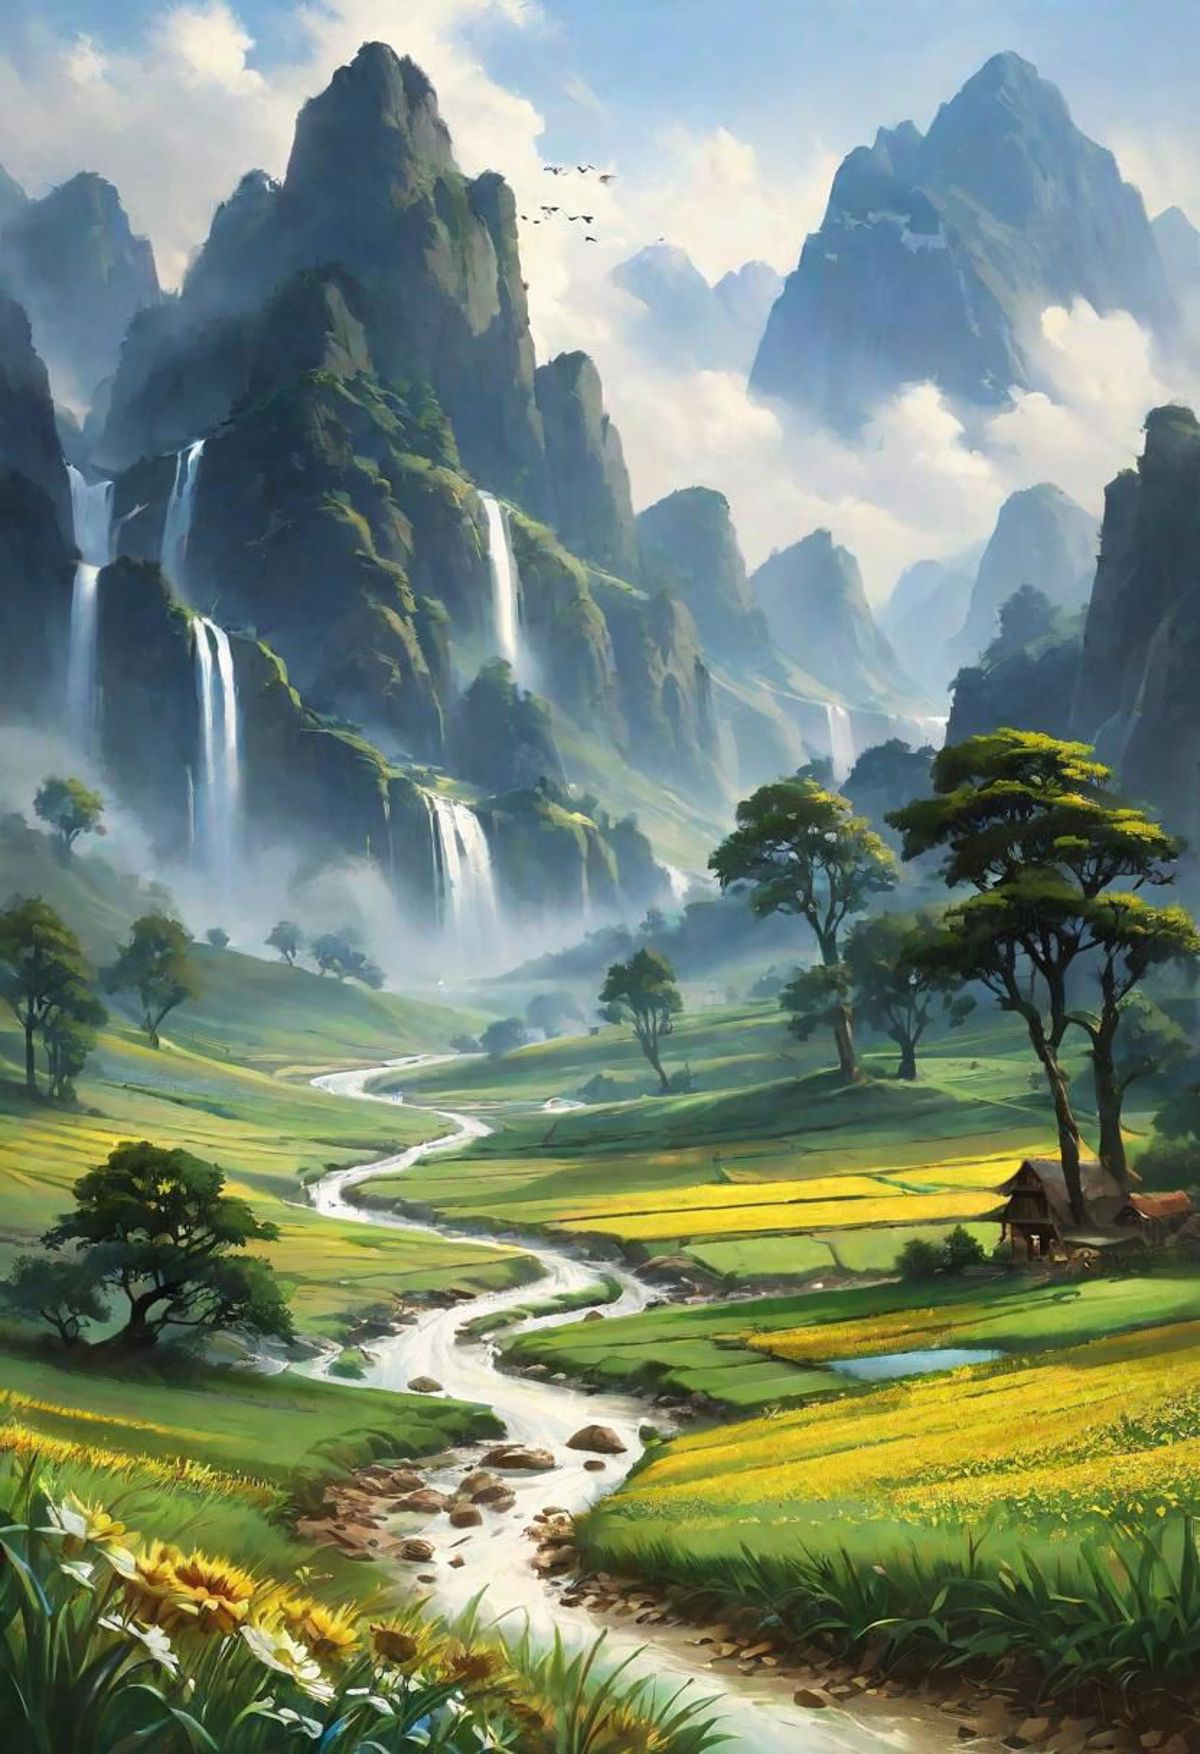 A beautiful painting of a mountain stream surrounded by trees, a waterfall, and a village.